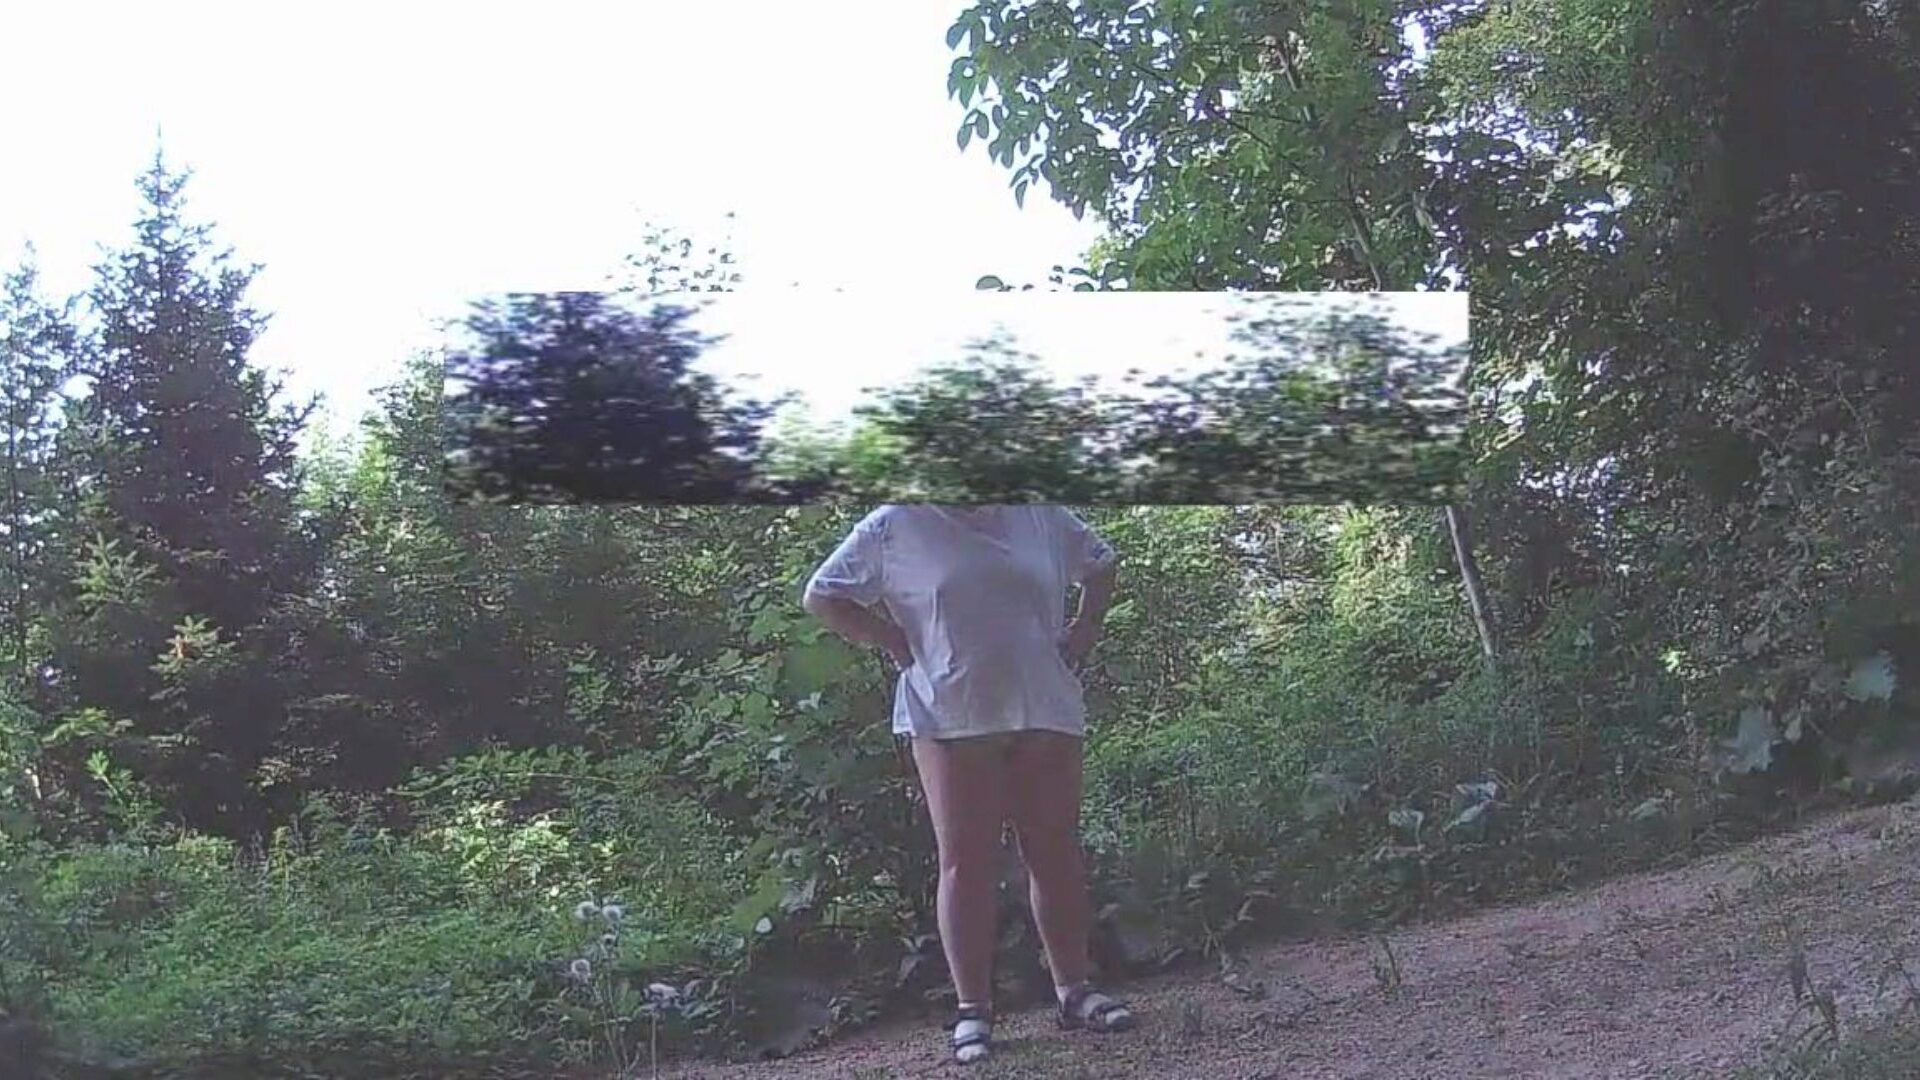 The oldie with his wife in the forest (Not top quality) The oldie had the opportunity to record and kiss and hughing time outdoor. He is proud to share this with you